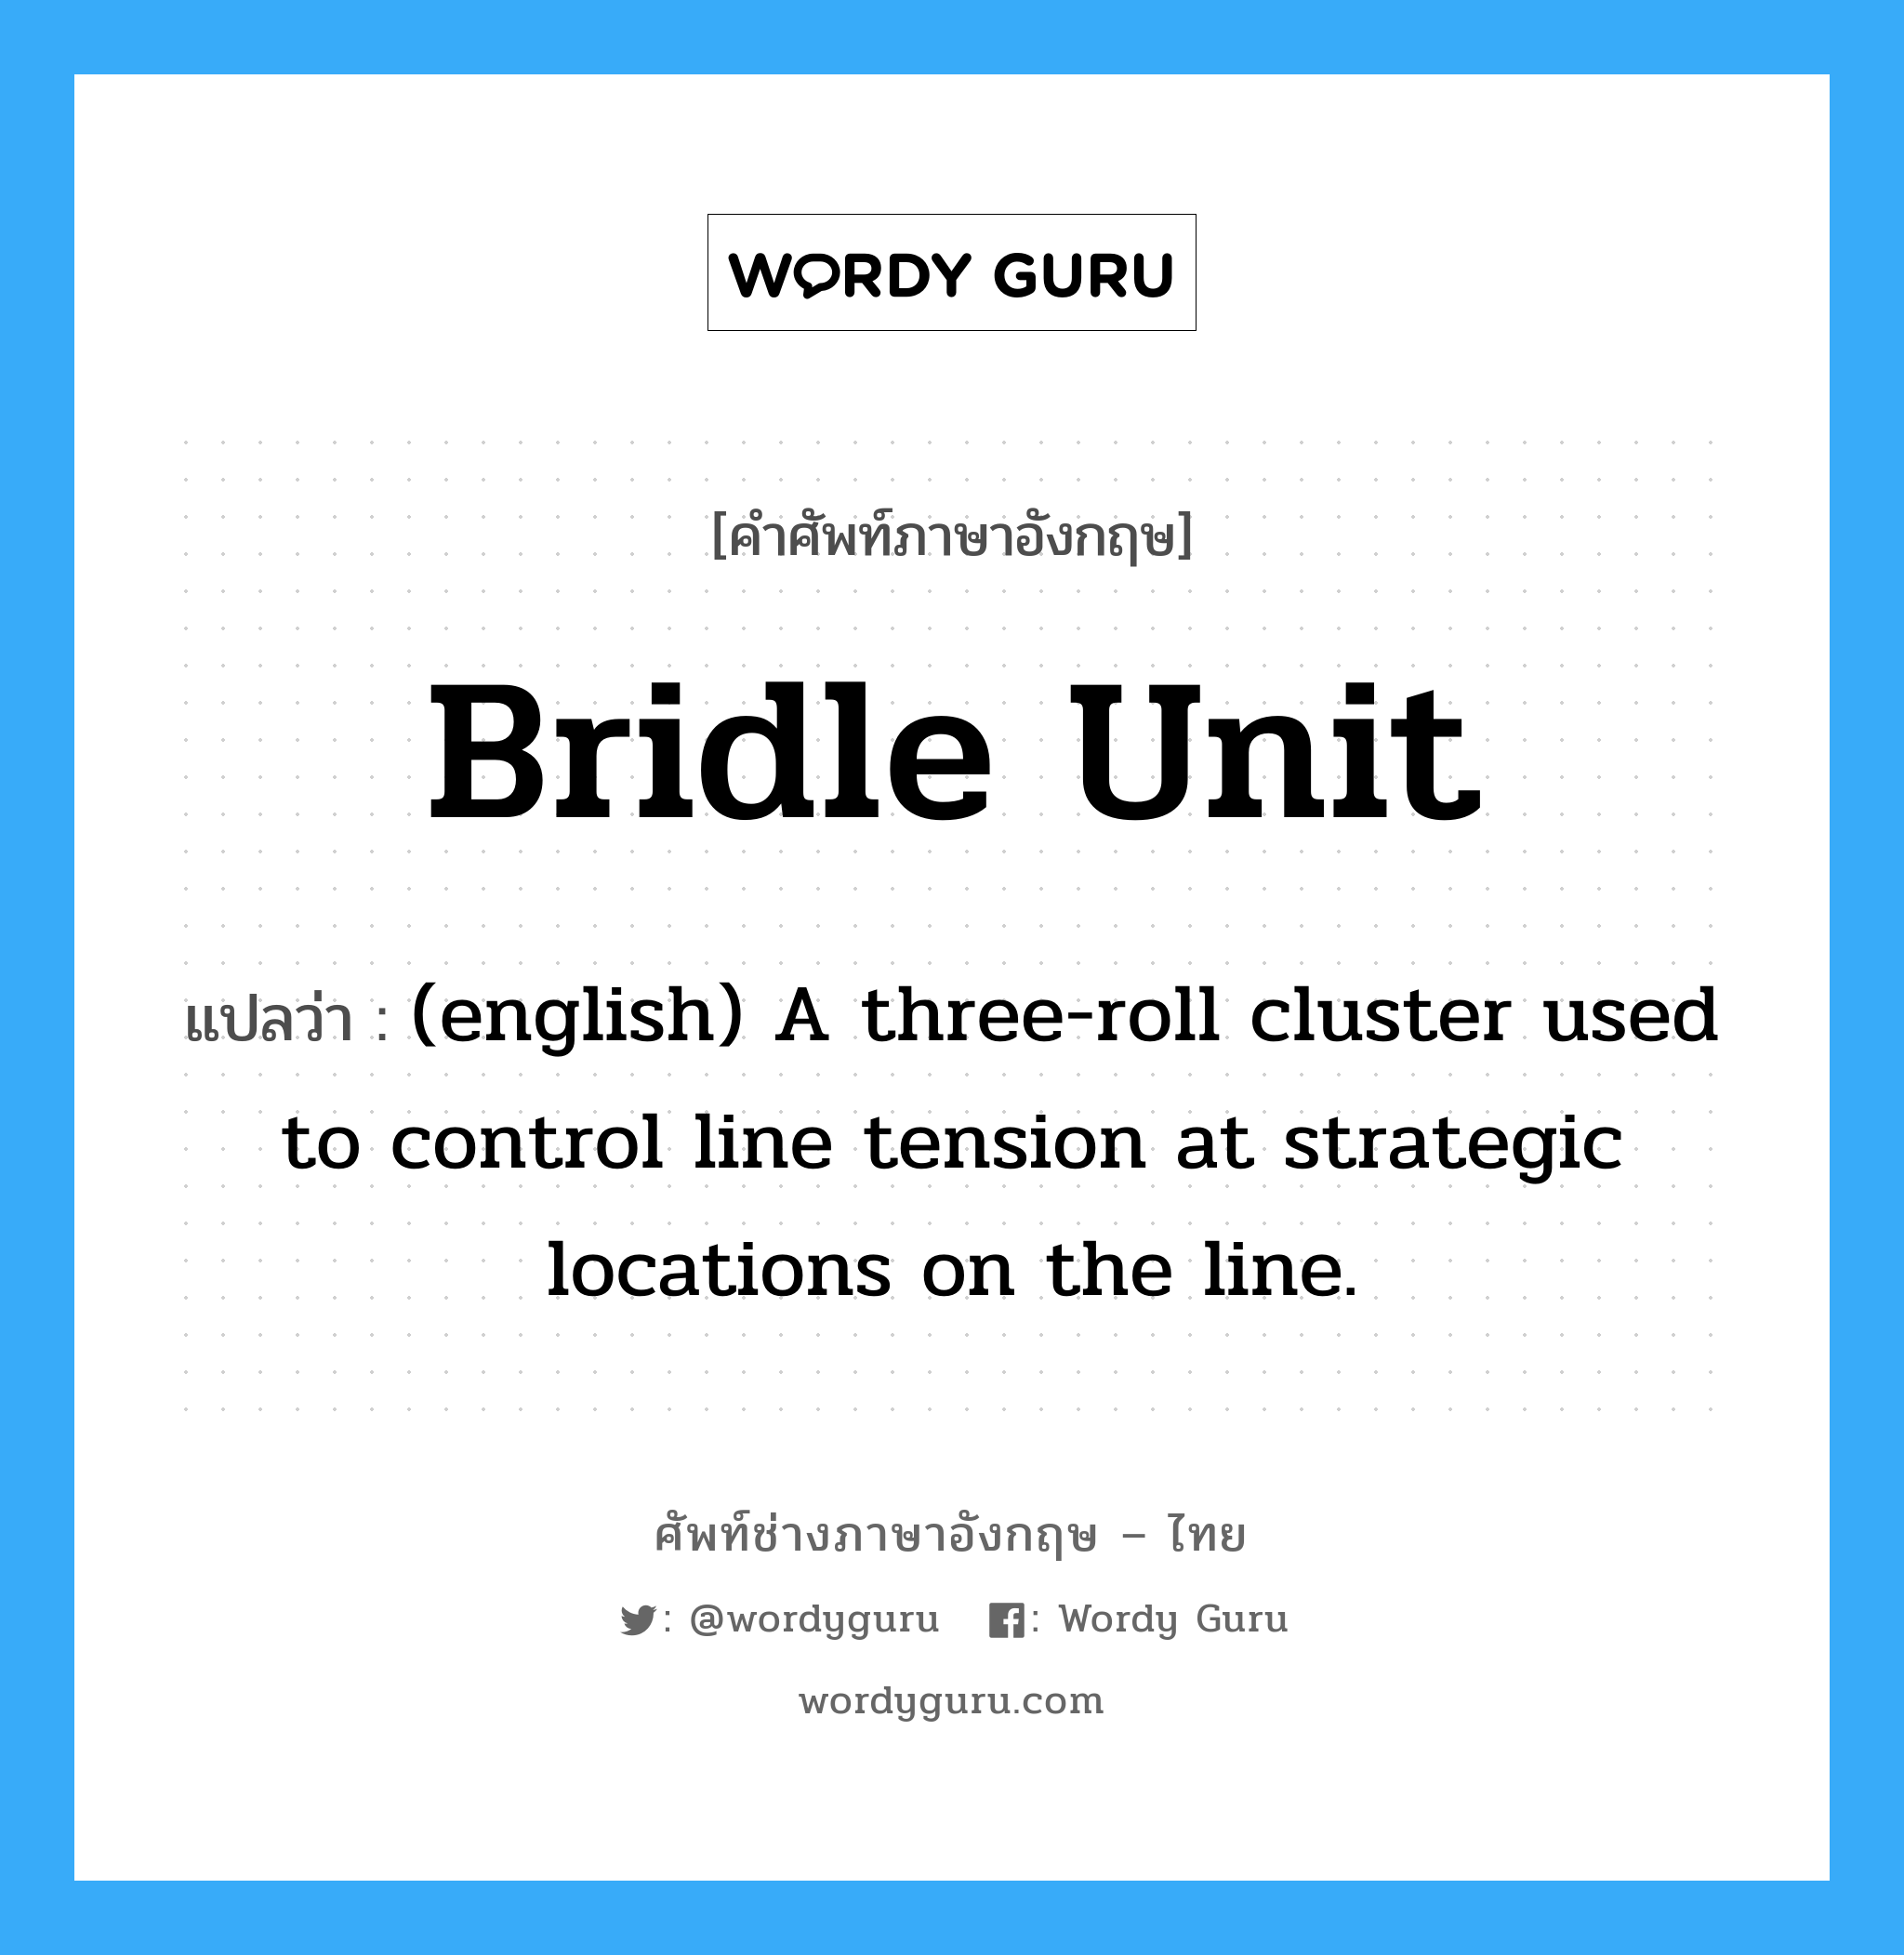 Bridle Unit แปลว่า?, คำศัพท์ช่างภาษาอังกฤษ - ไทย Bridle Unit คำศัพท์ภาษาอังกฤษ Bridle Unit แปลว่า (english) A three-roll cluster used to control line tension at strategic locations on the line.